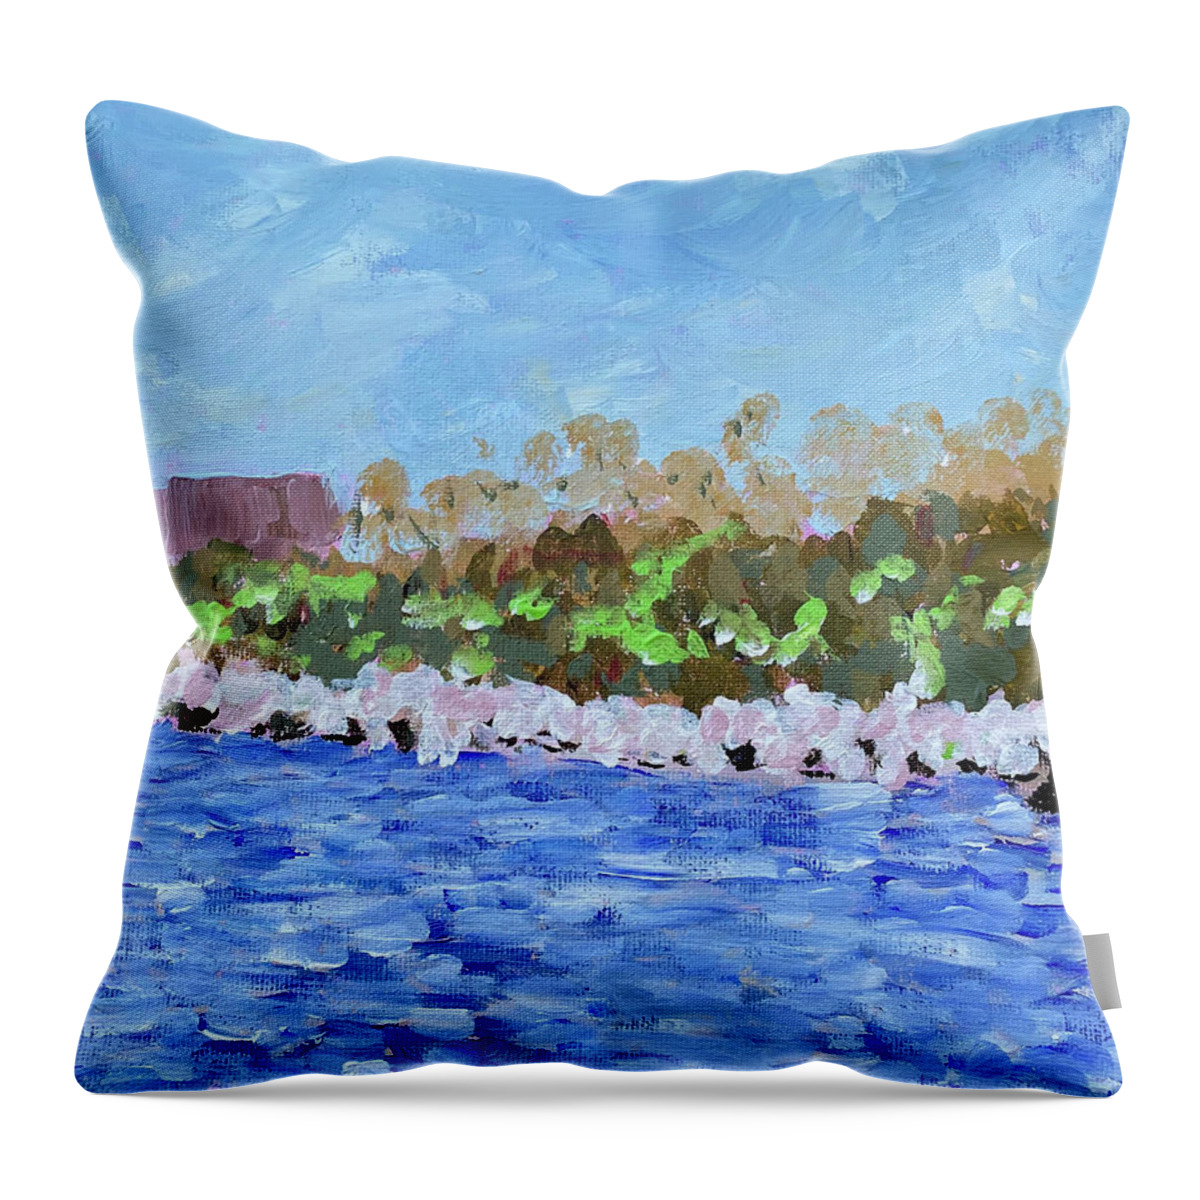  Throw Pillow featuring the painting Plein Air Blossoms by John Macarthur